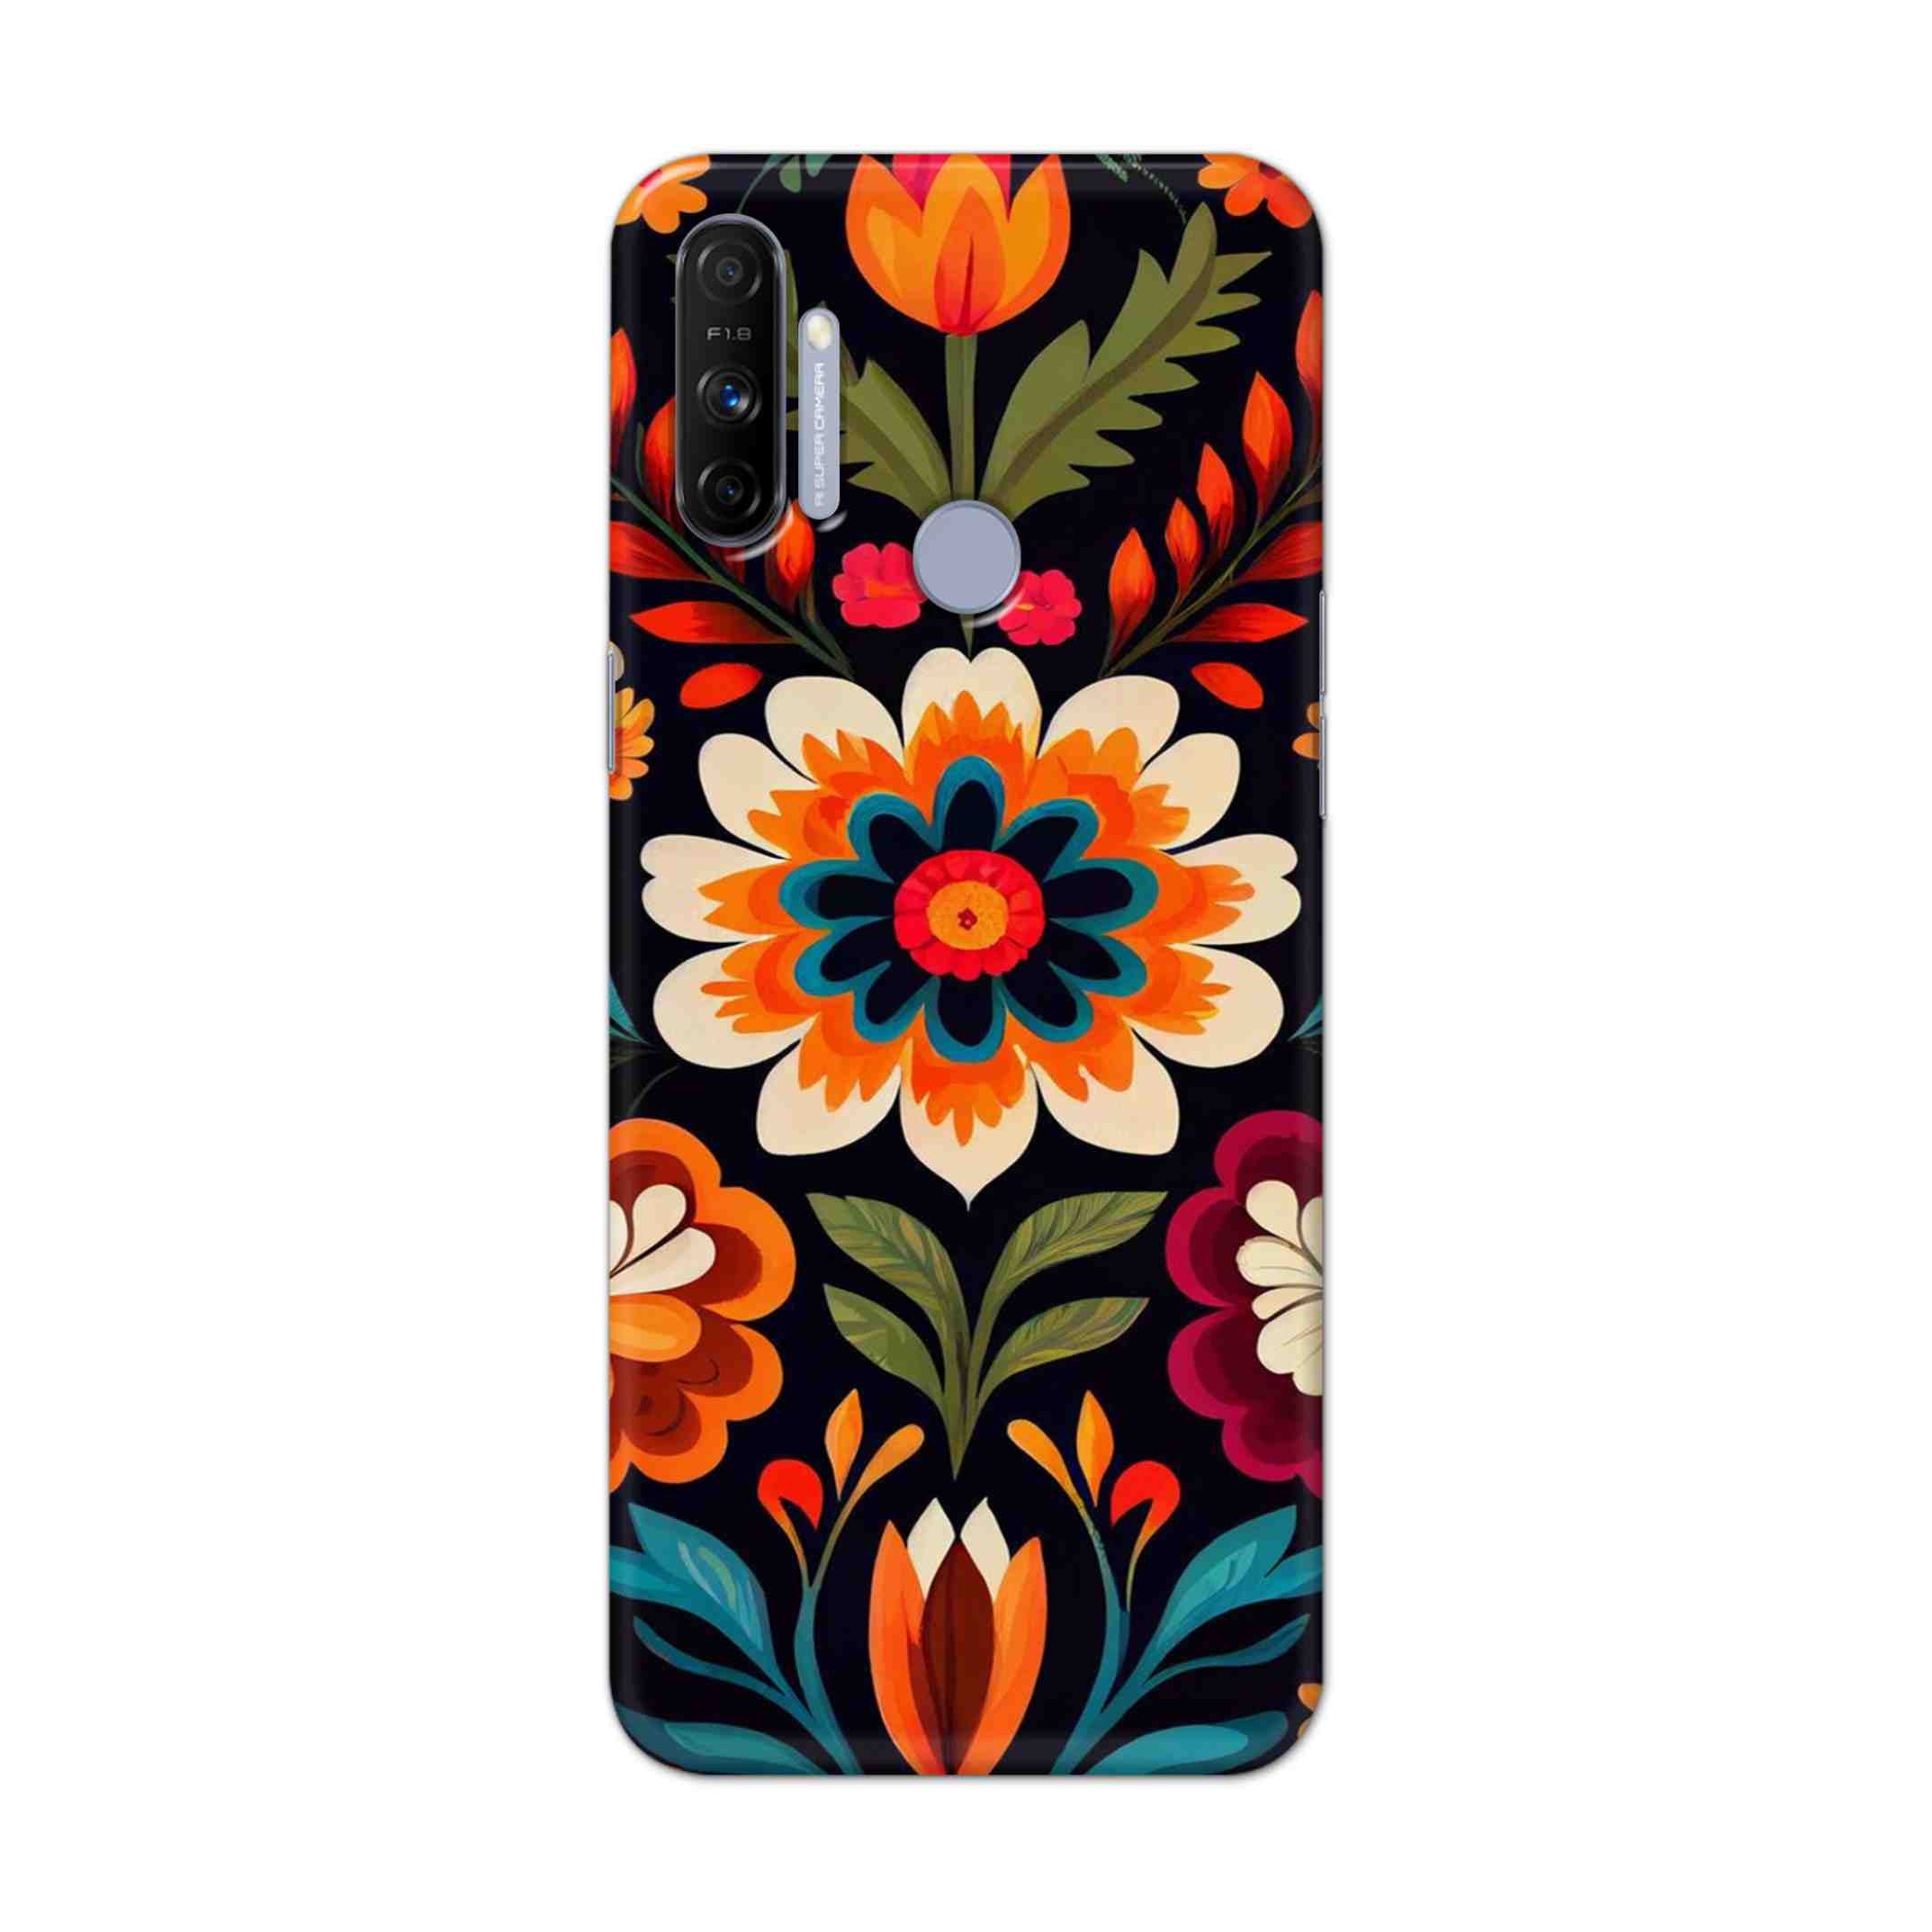 Buy Flower Hard Back Mobile Phone Case Cover For Realme Narzo 20A Online